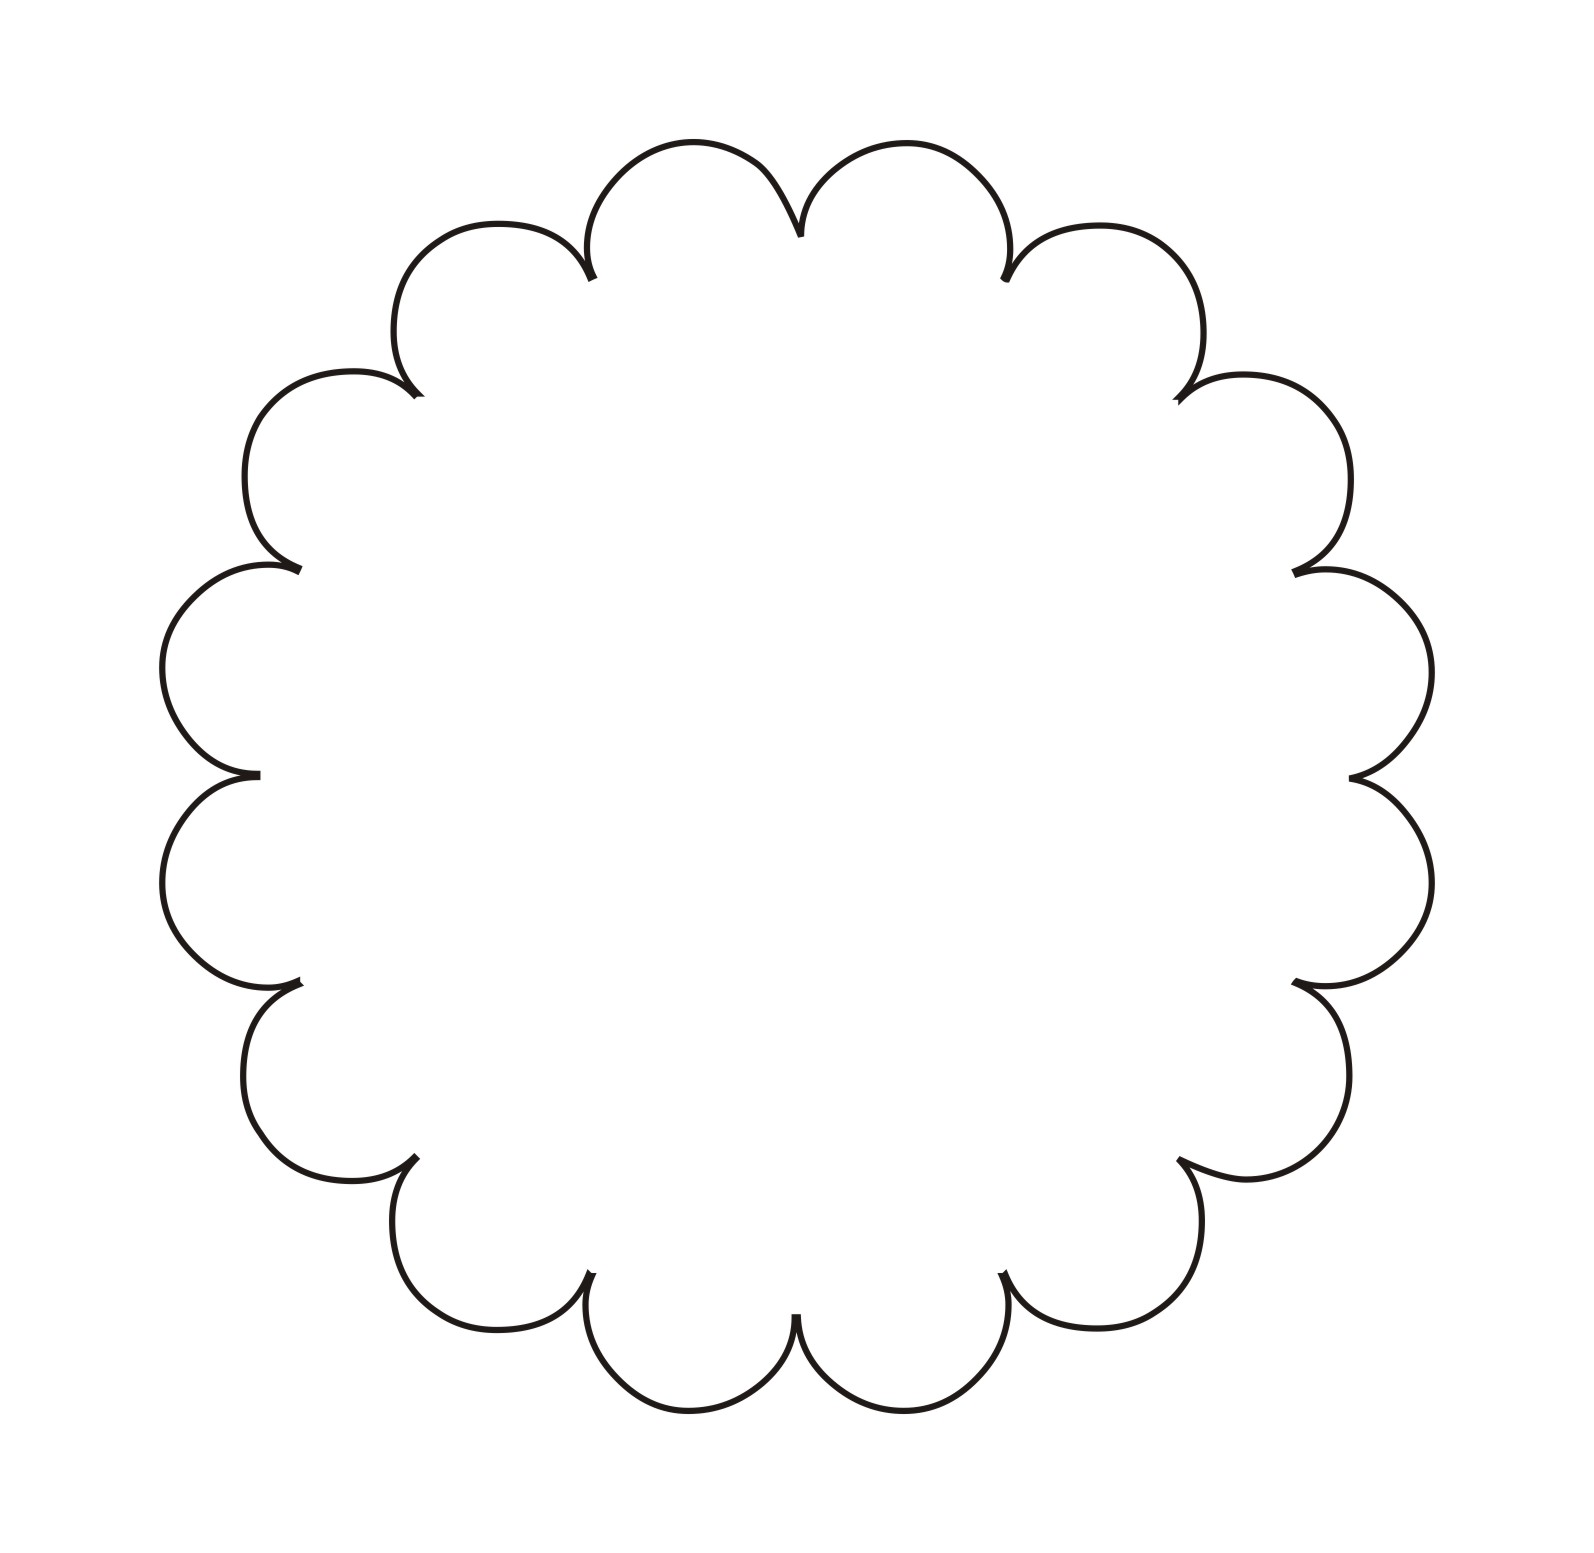 Black and white scalloped circle clipart